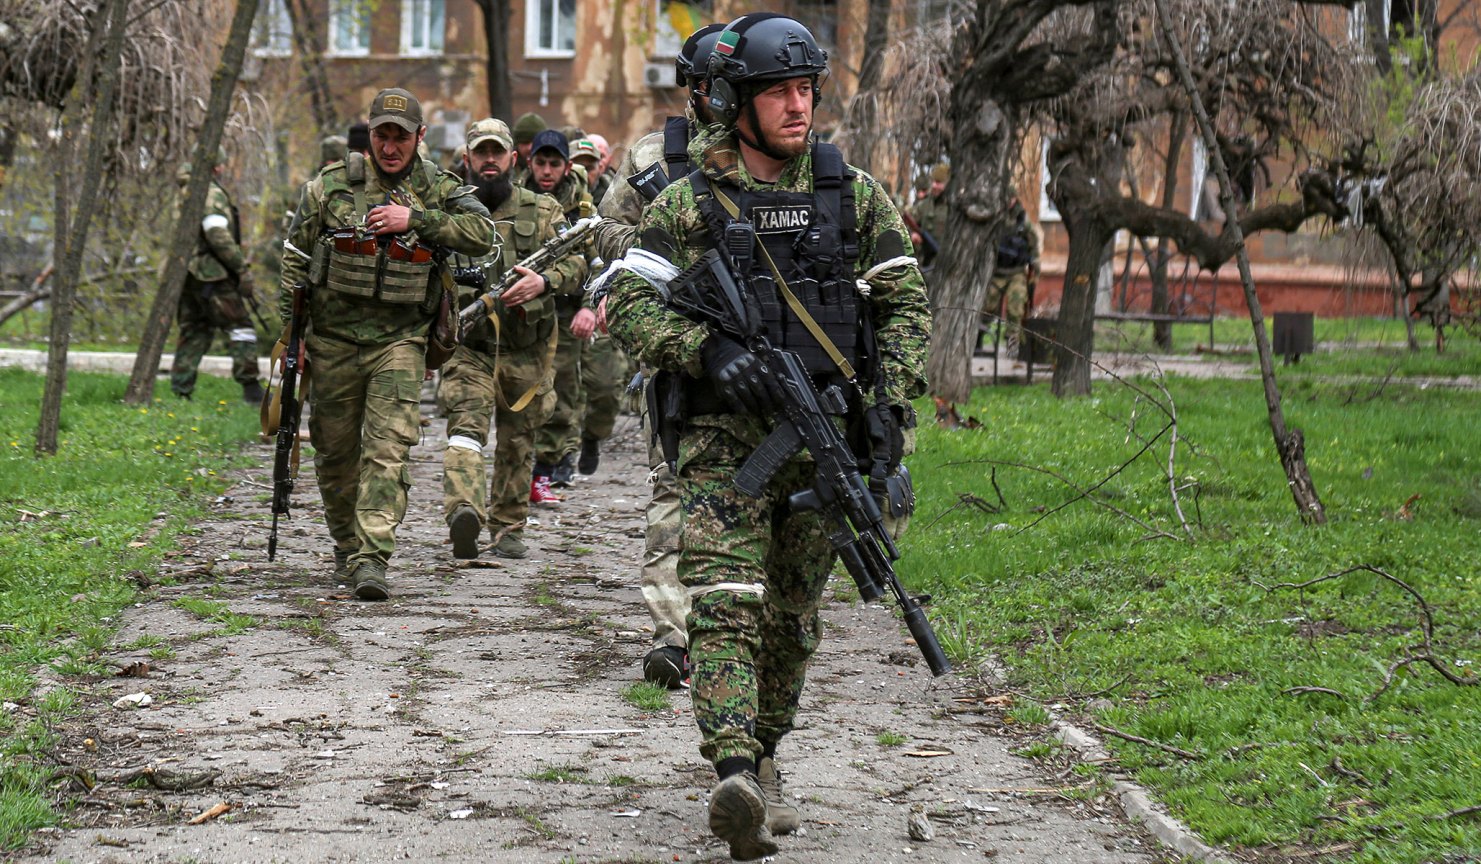 Fighters of a Chechen special forces unit walk in a courtyard in Mariupol, Ukraine